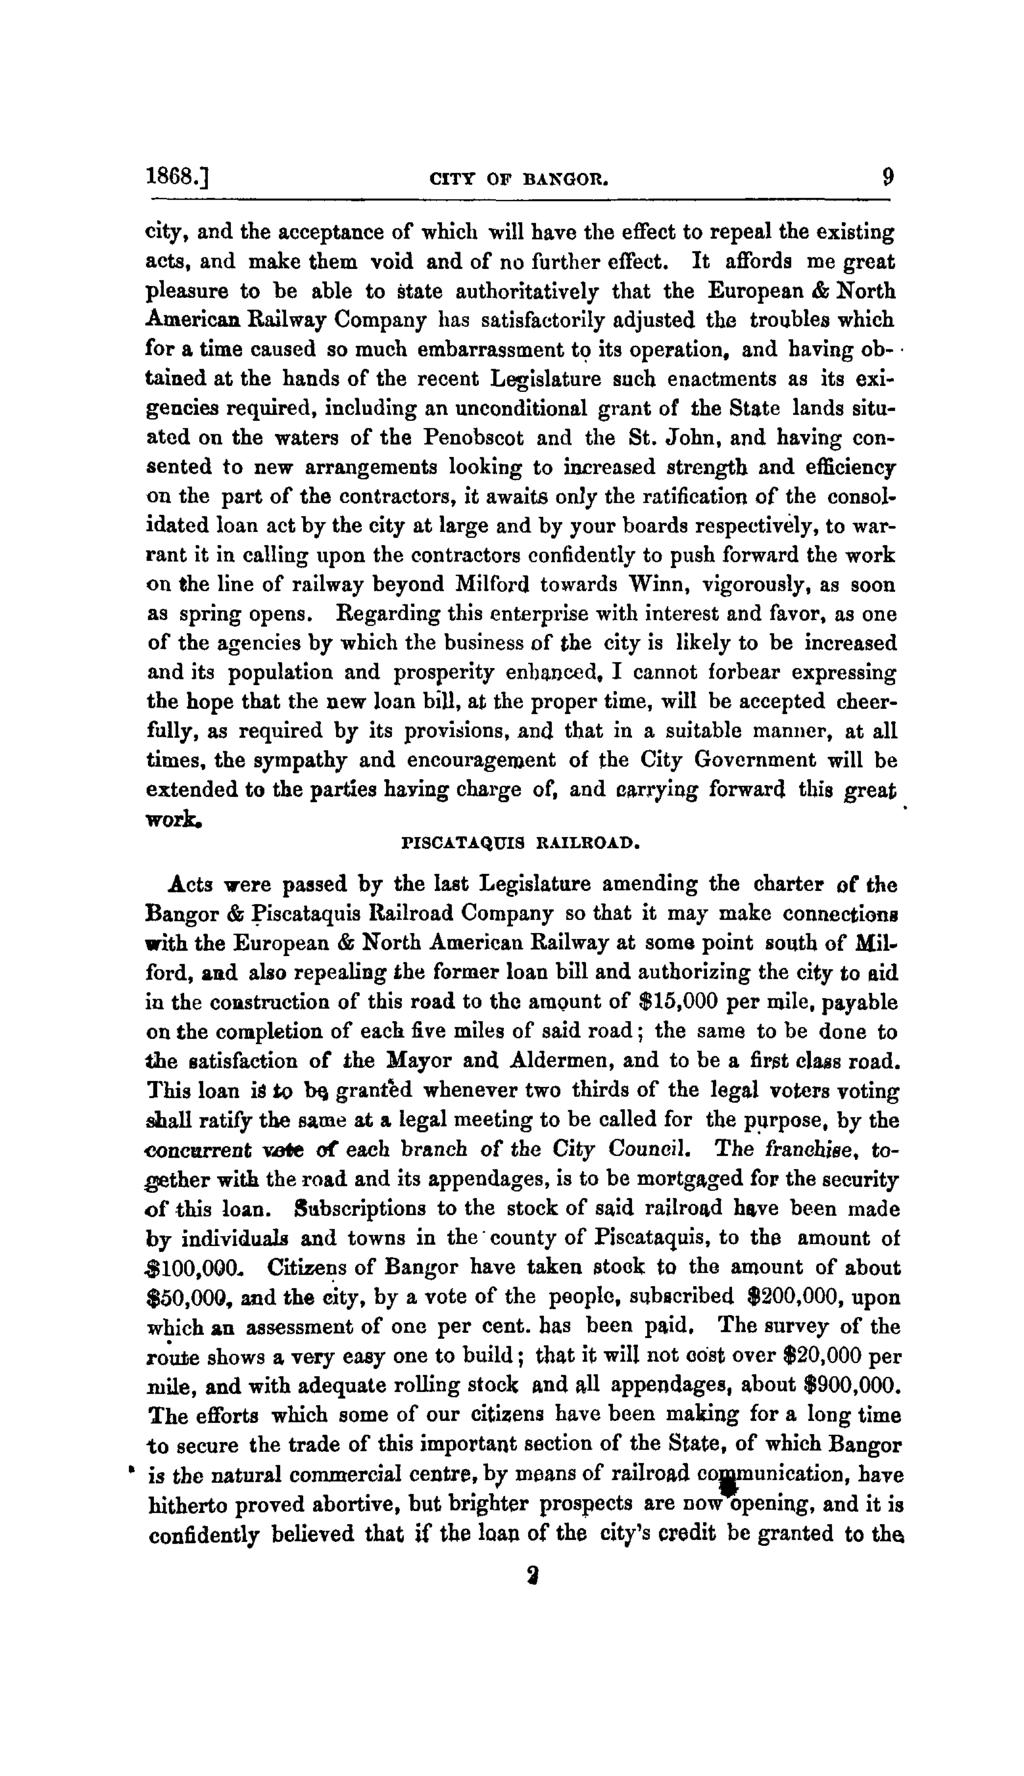 1868.] CITY OF BANGOR. 9 city, and the acceptance of which will have the effect to repeal the existing acts, and make them void and of no further effect.